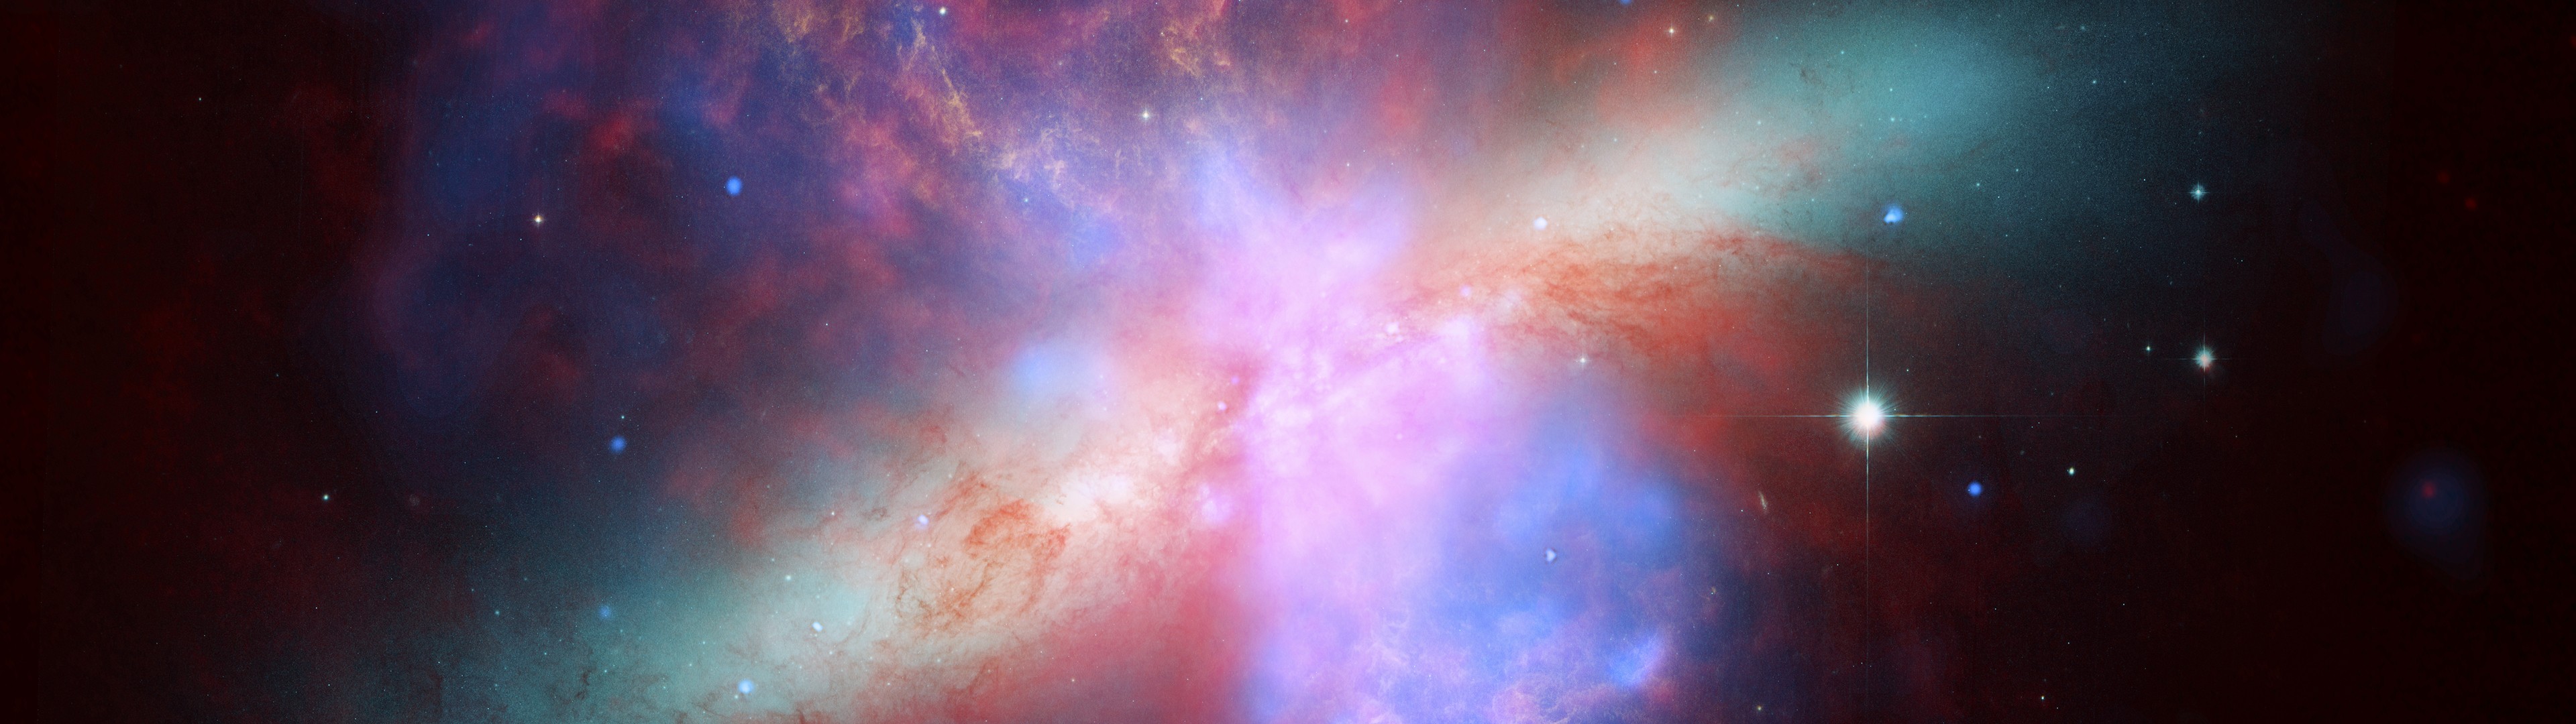 General 3840x1080 multiple display stars space colorful galaxy universe Messier 82 space art digital art